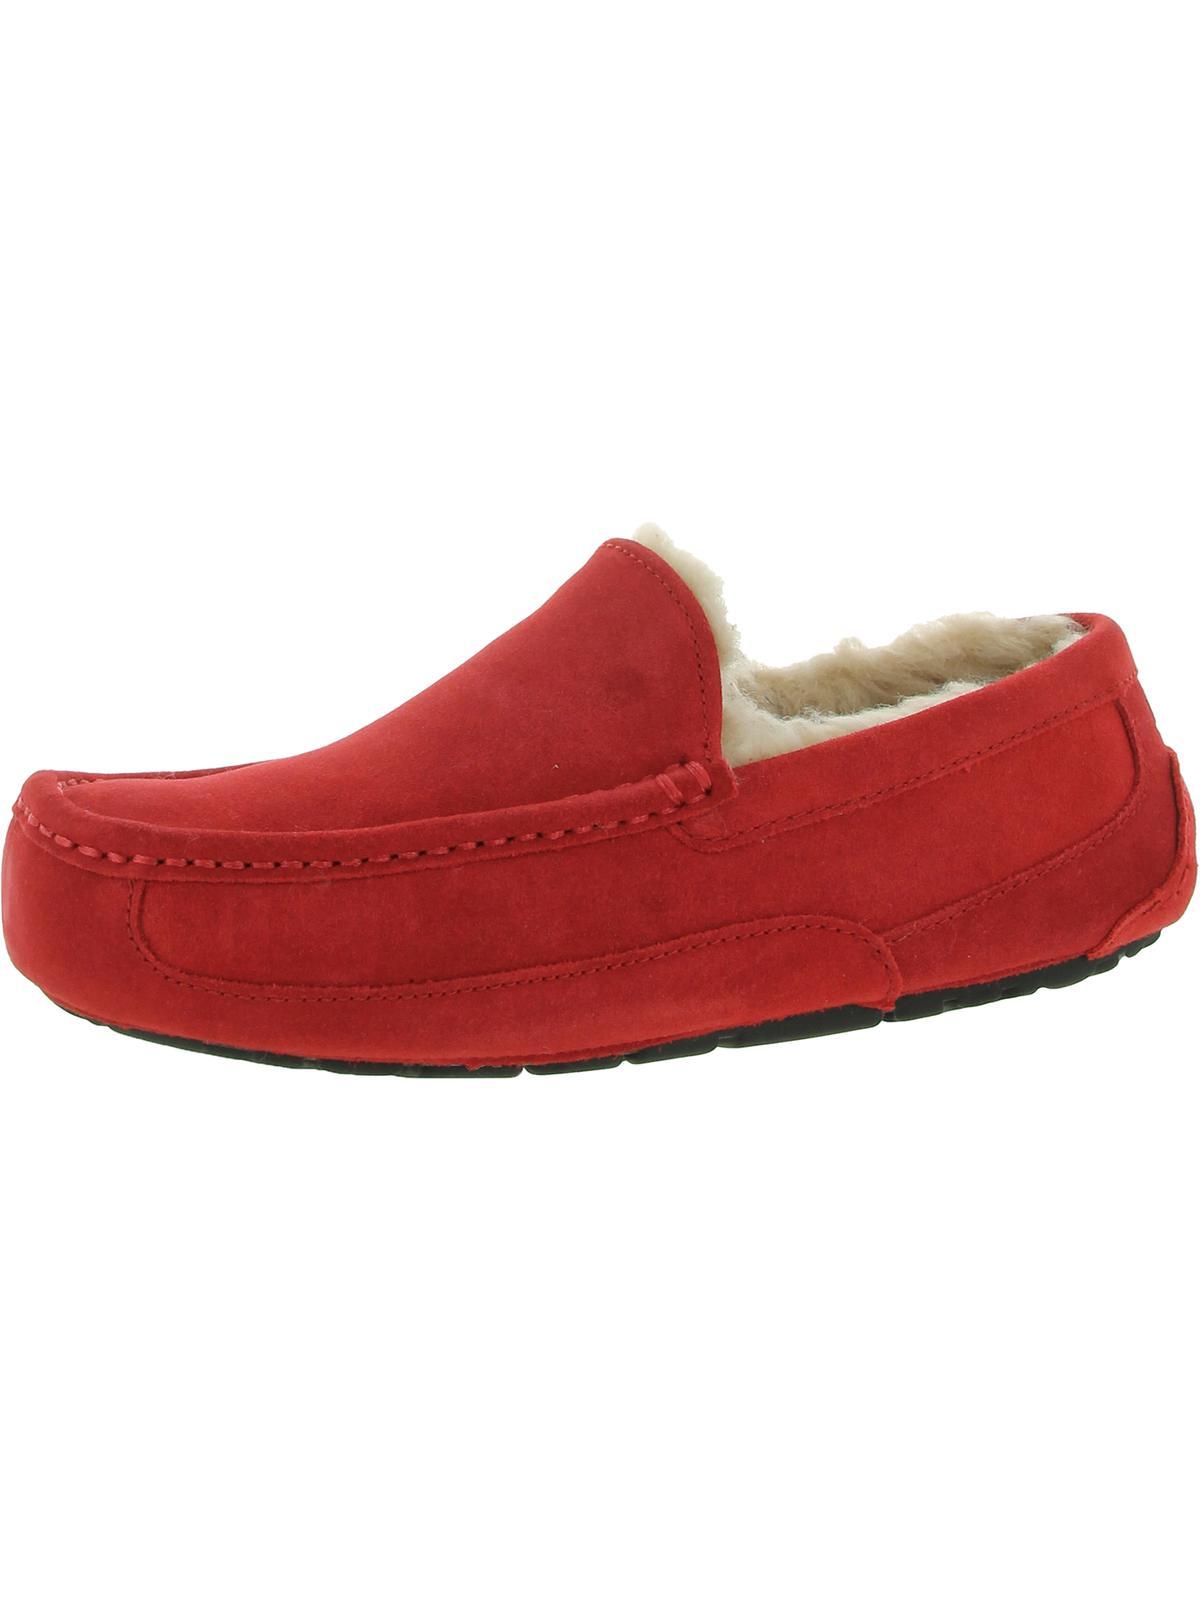 UGG Ascot Suede Shearling Moccasin Slippers in Red for Men | Lyst